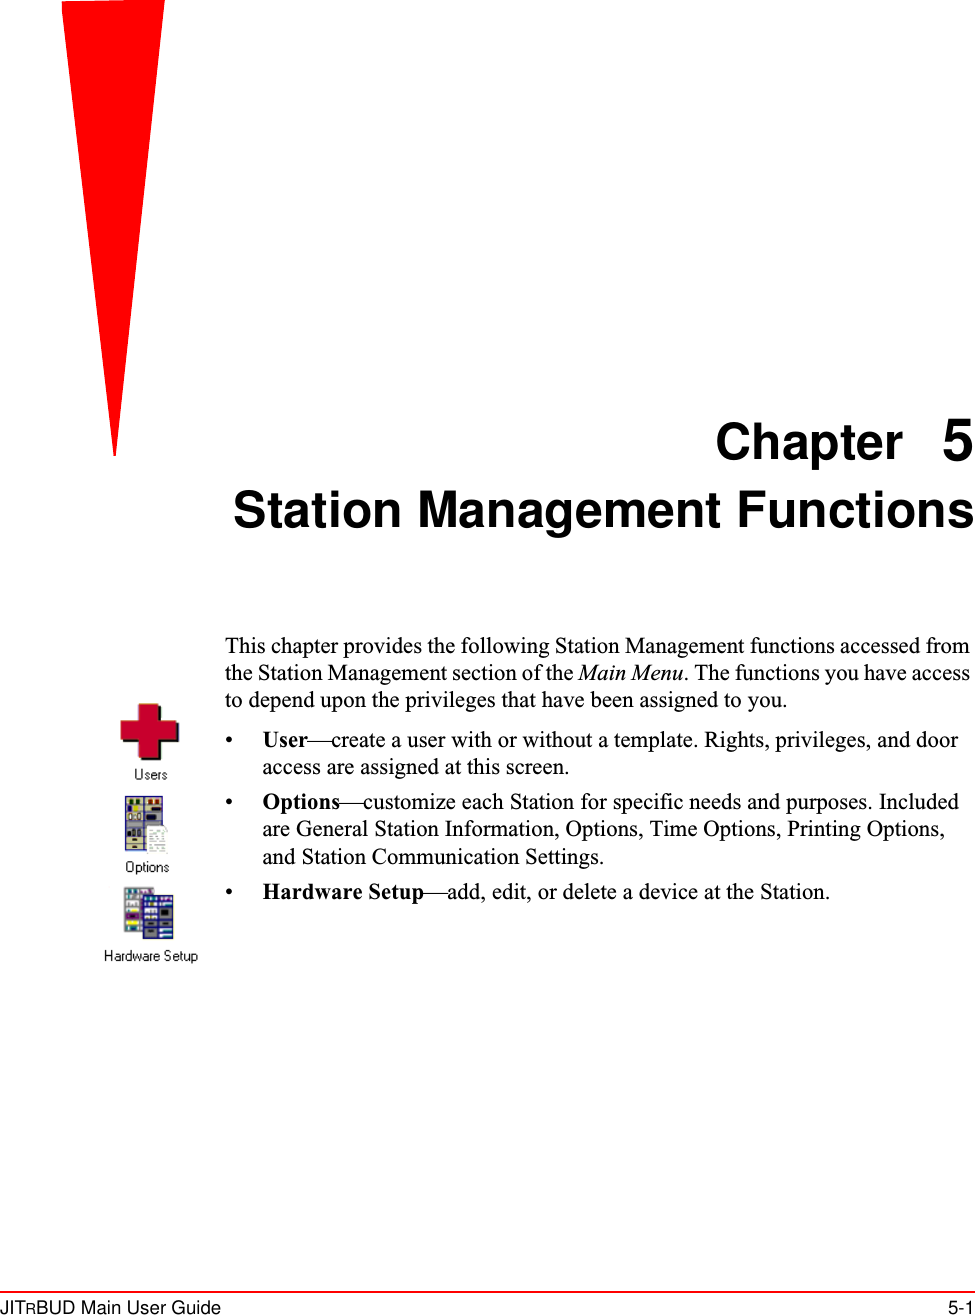 JITRBUD Main User Guide 5-1Chapter 5Station Management FunctionsThis chapter provides the following Station Management functions accessed from the Station Management section of the Main Menu. The functions you have access to depend upon the privileges that have been assigned to you.•User—create a user with or without a template. Rights, privileges, and door access are assigned at this screen. •Options—customize each Station for specific needs and purposes. Included are General Station Information, Options, Time Options, Printing Options, and Station Communication Settings. •Hardware Setup—add, edit, or delete a device at the Station.